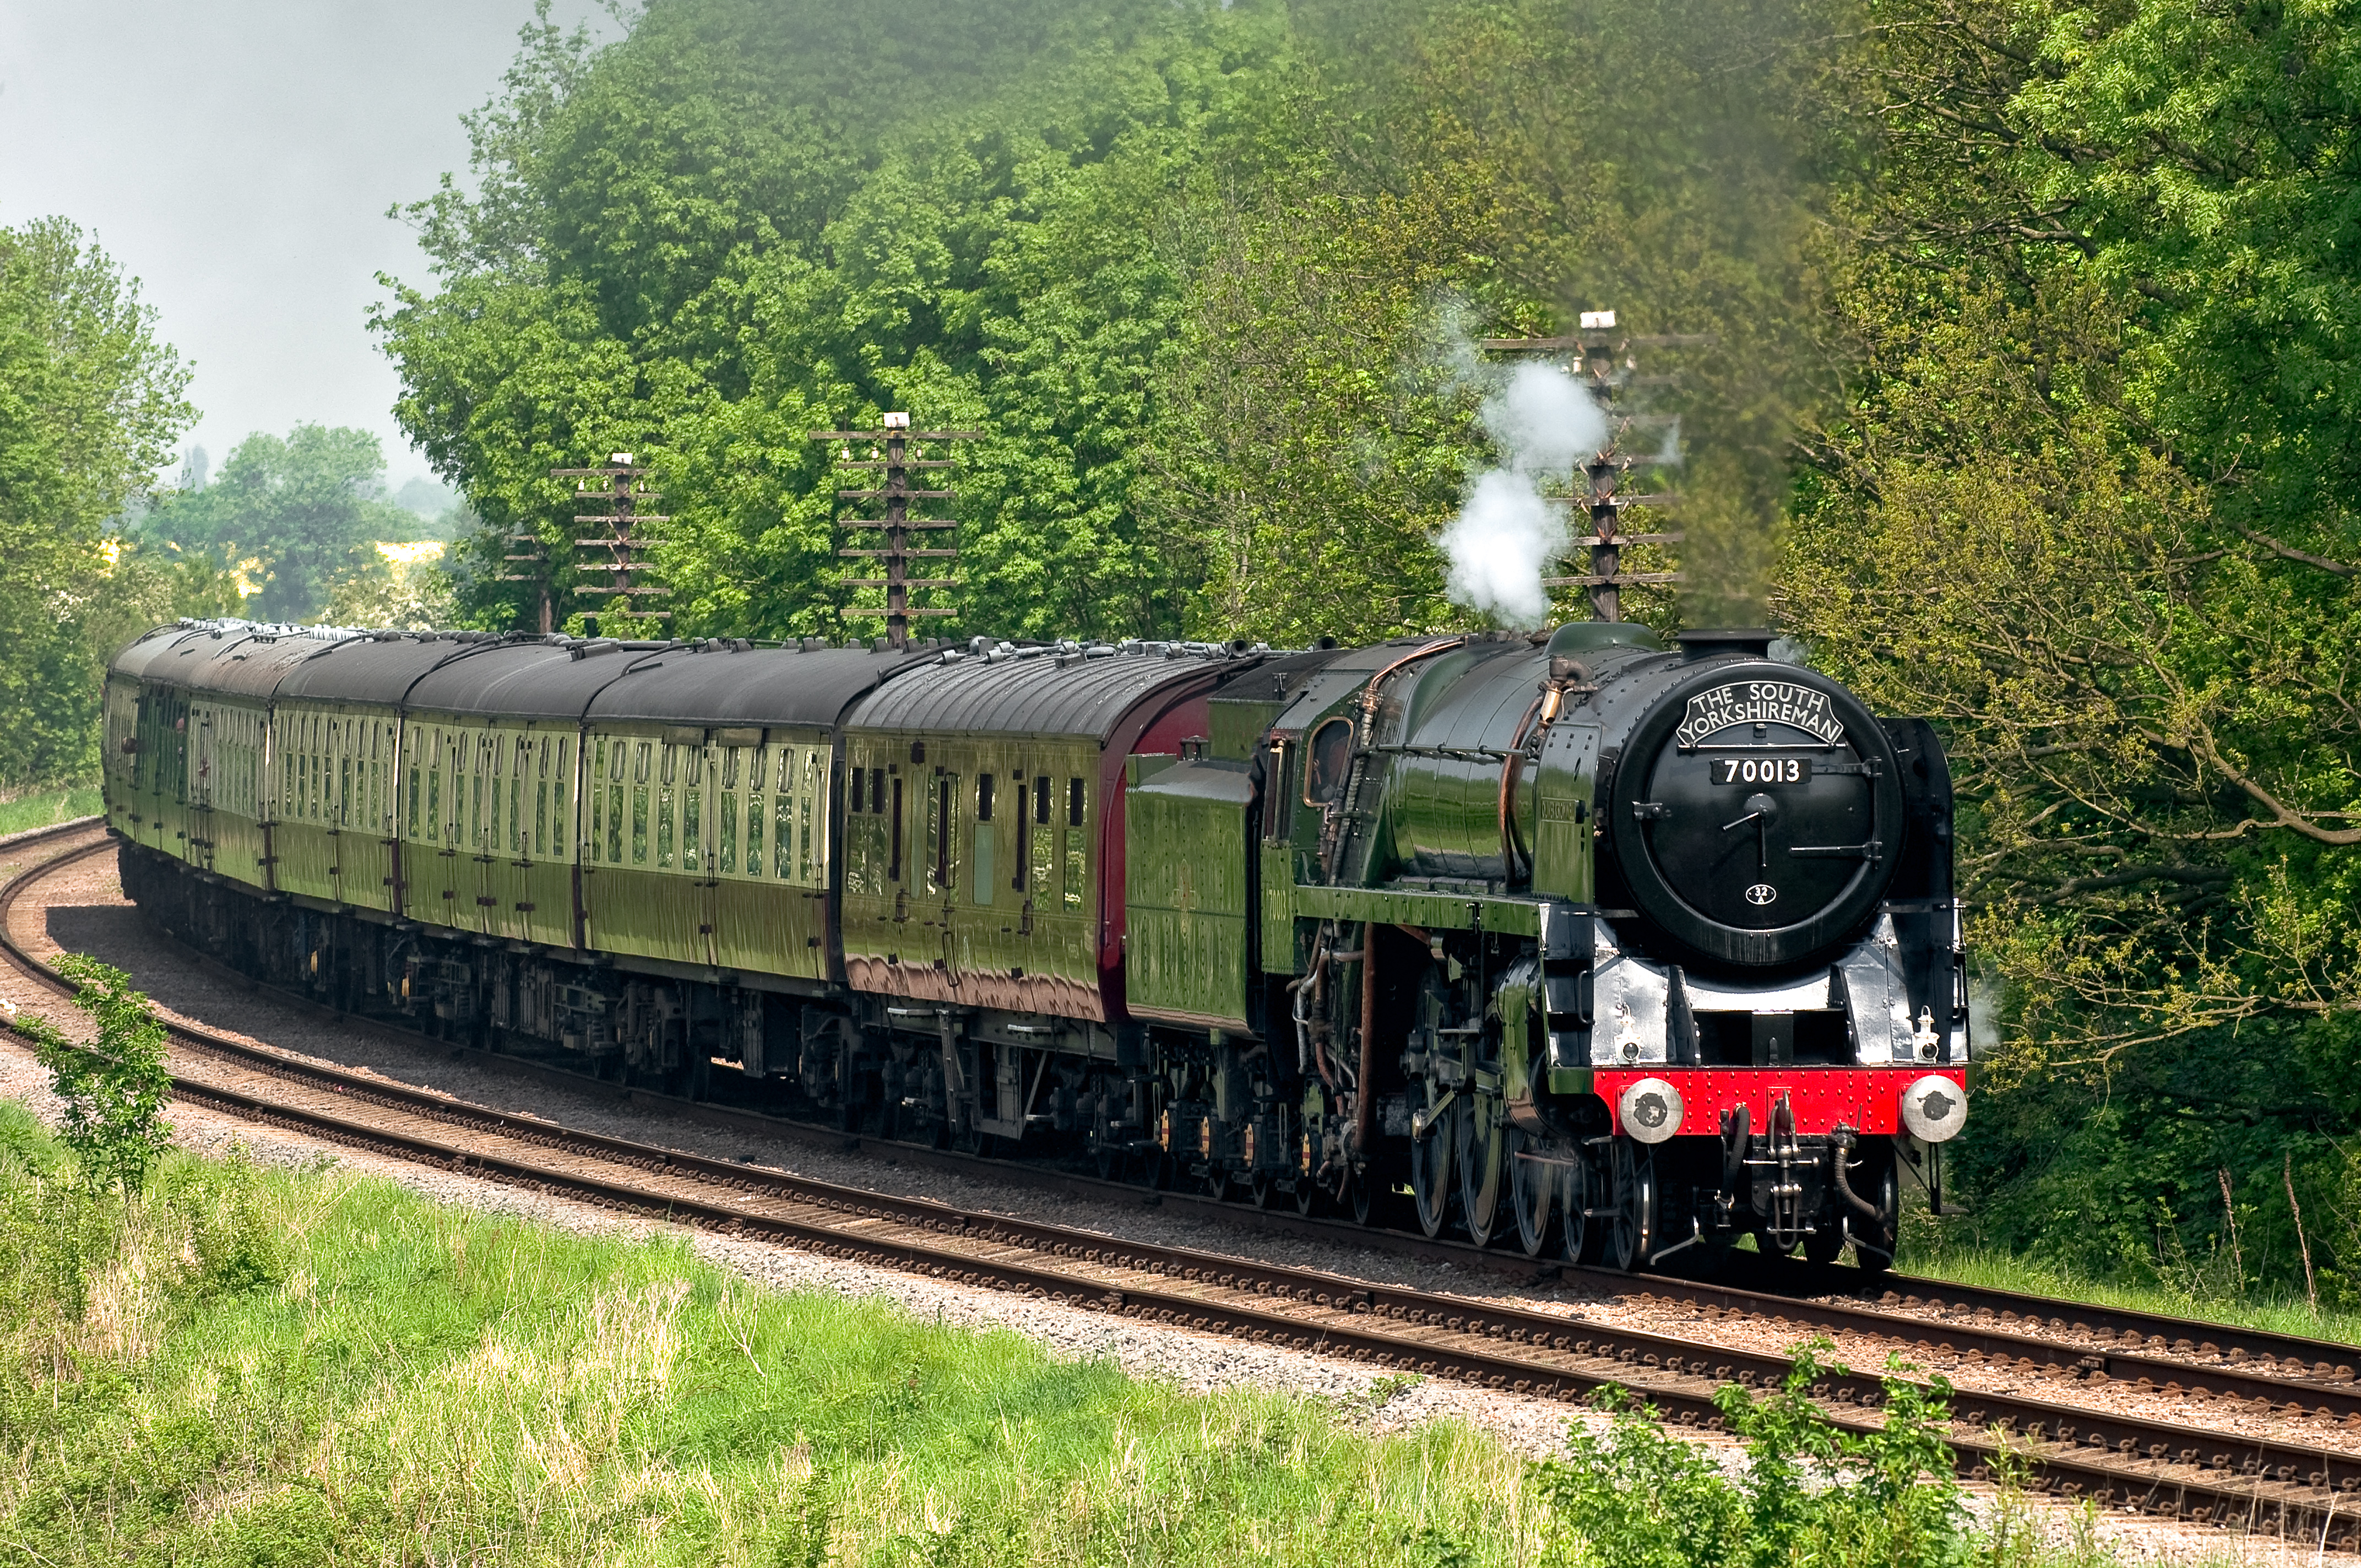 The 70013 Oliver Cromwell at the Great Central Railway, Loughborough (Rick Eborall/Great Central Railway/PA)